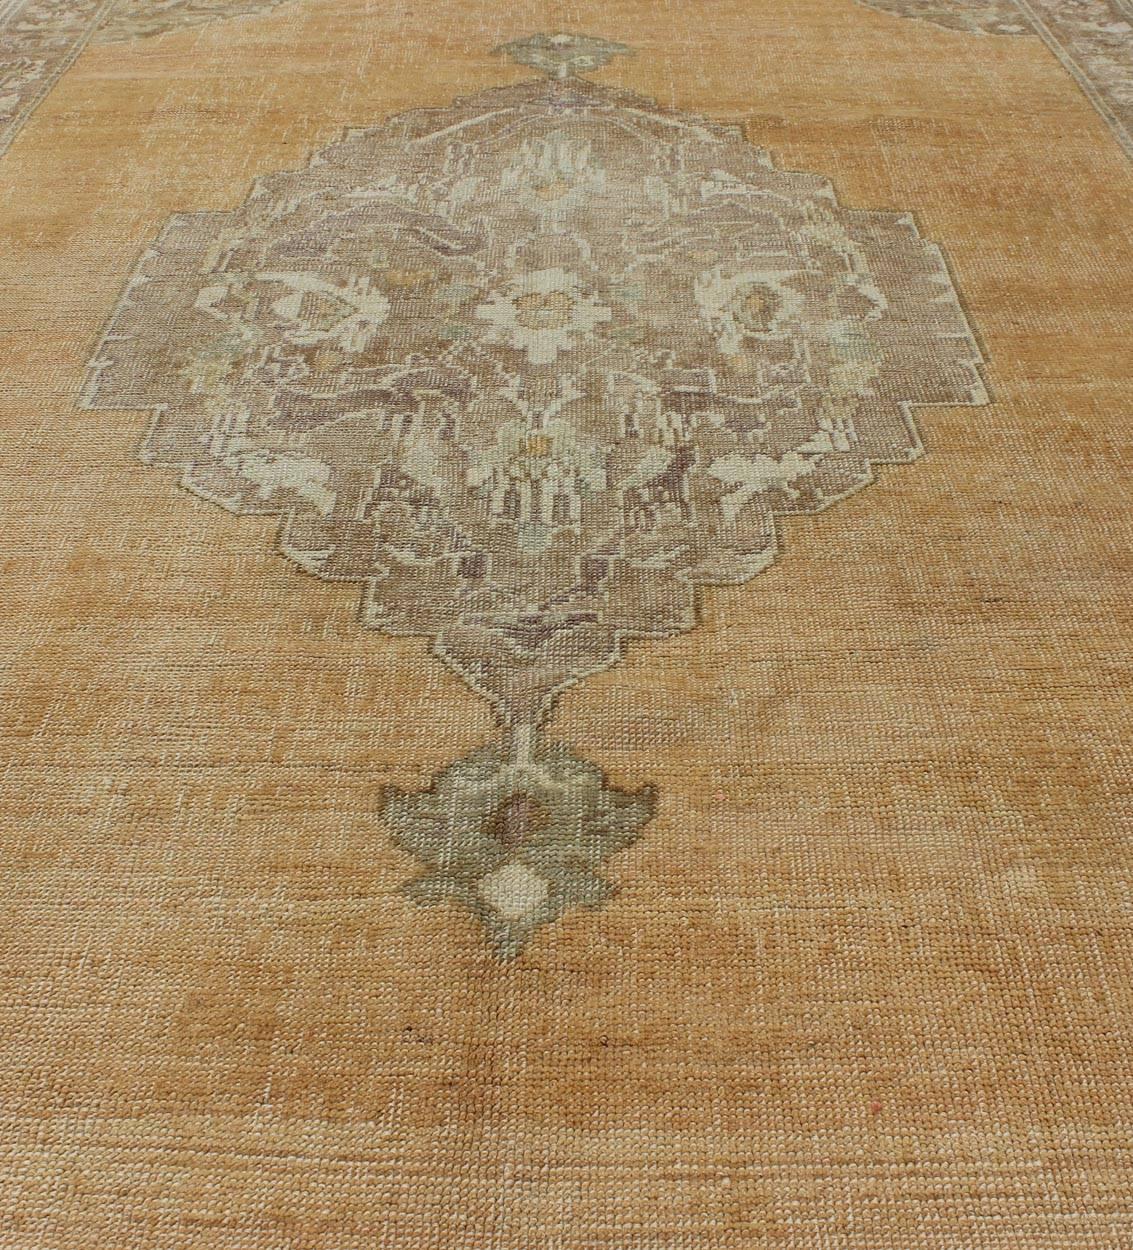 Wool Vintage Turkish Oushak Rug with Floral Medallion in Faded Orange and Light Brown